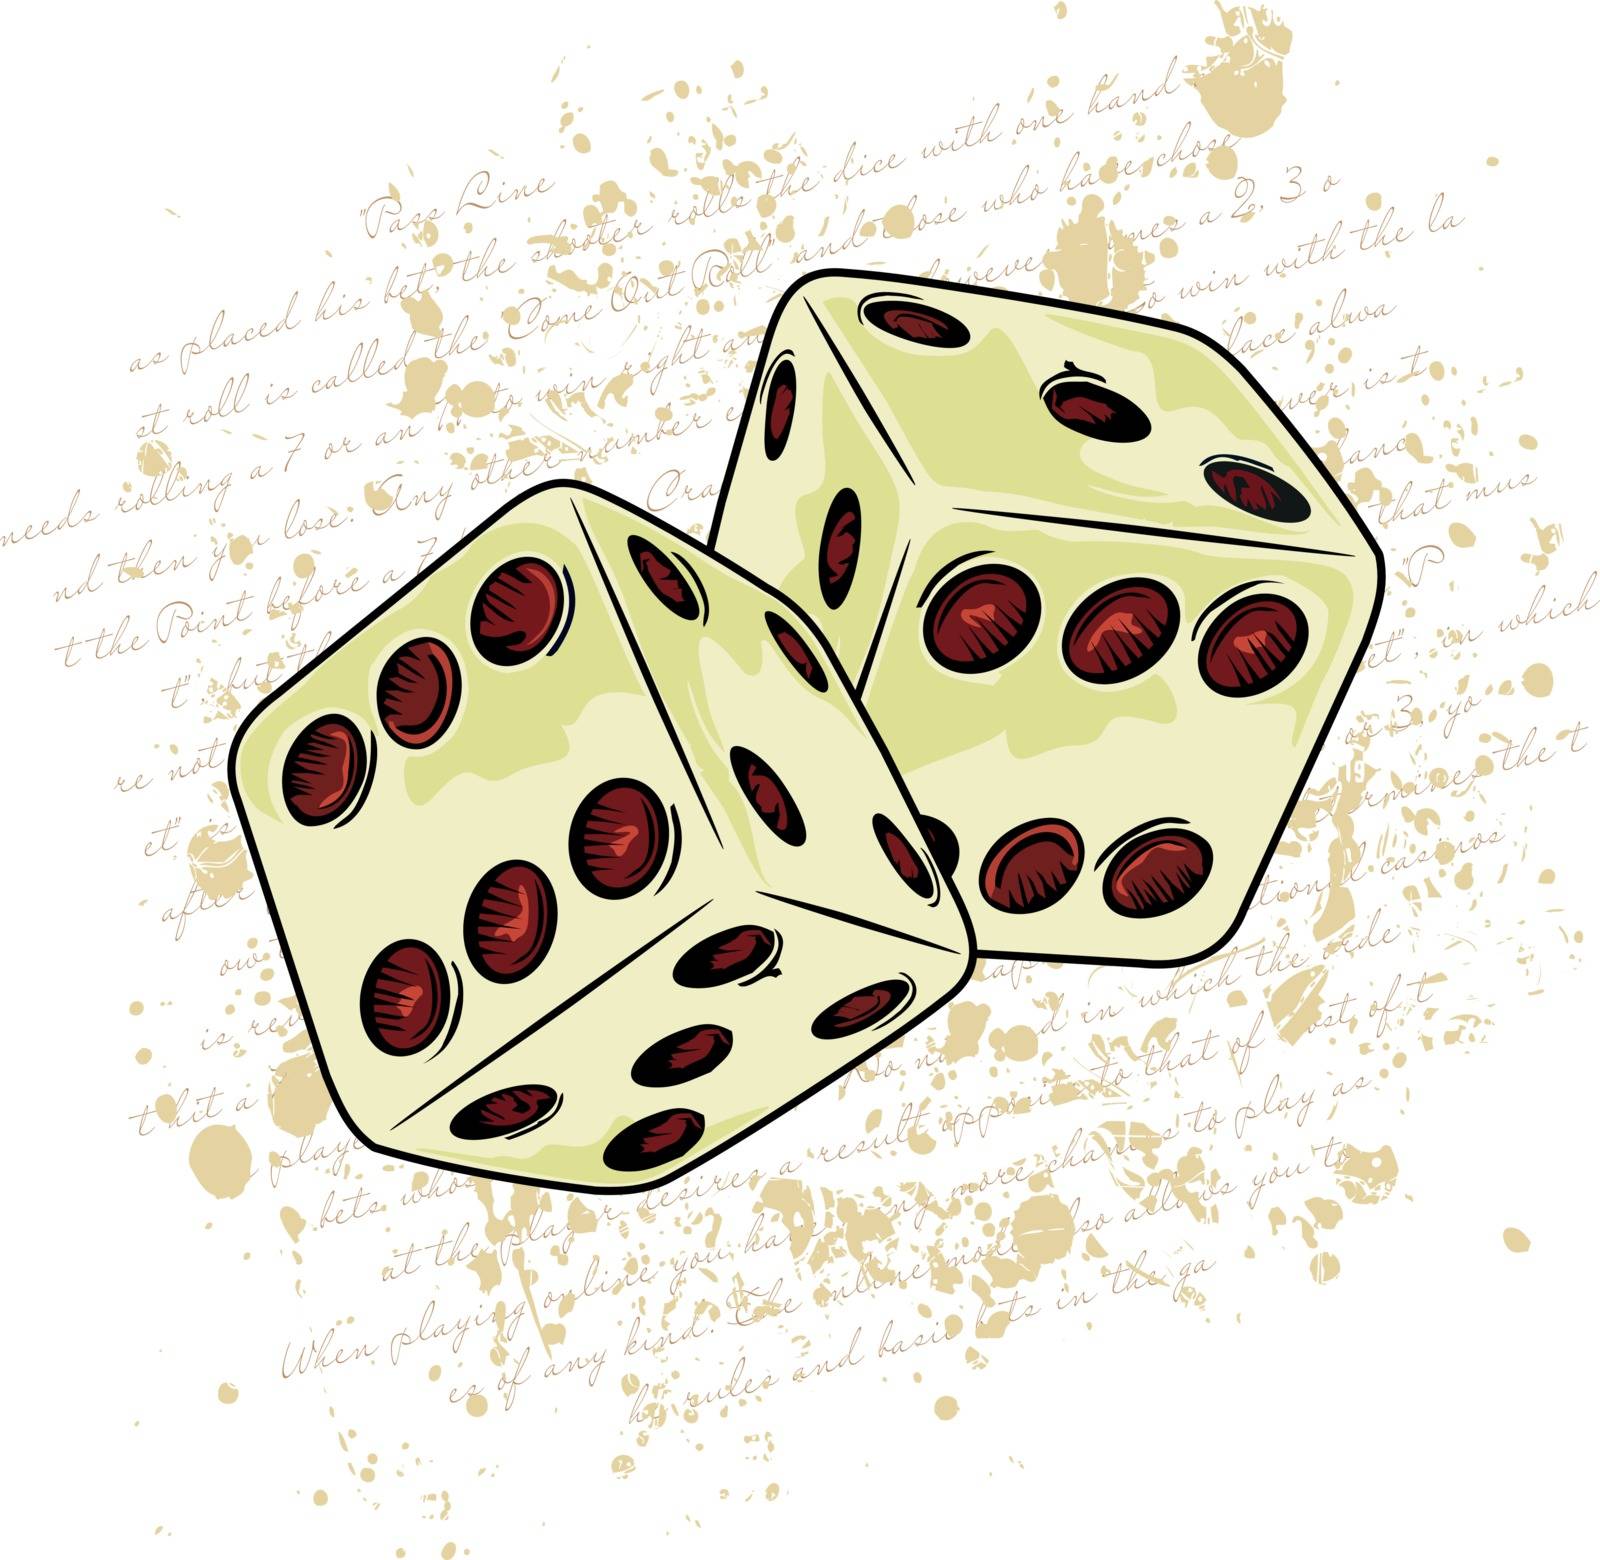 two dice with written and stains in the background